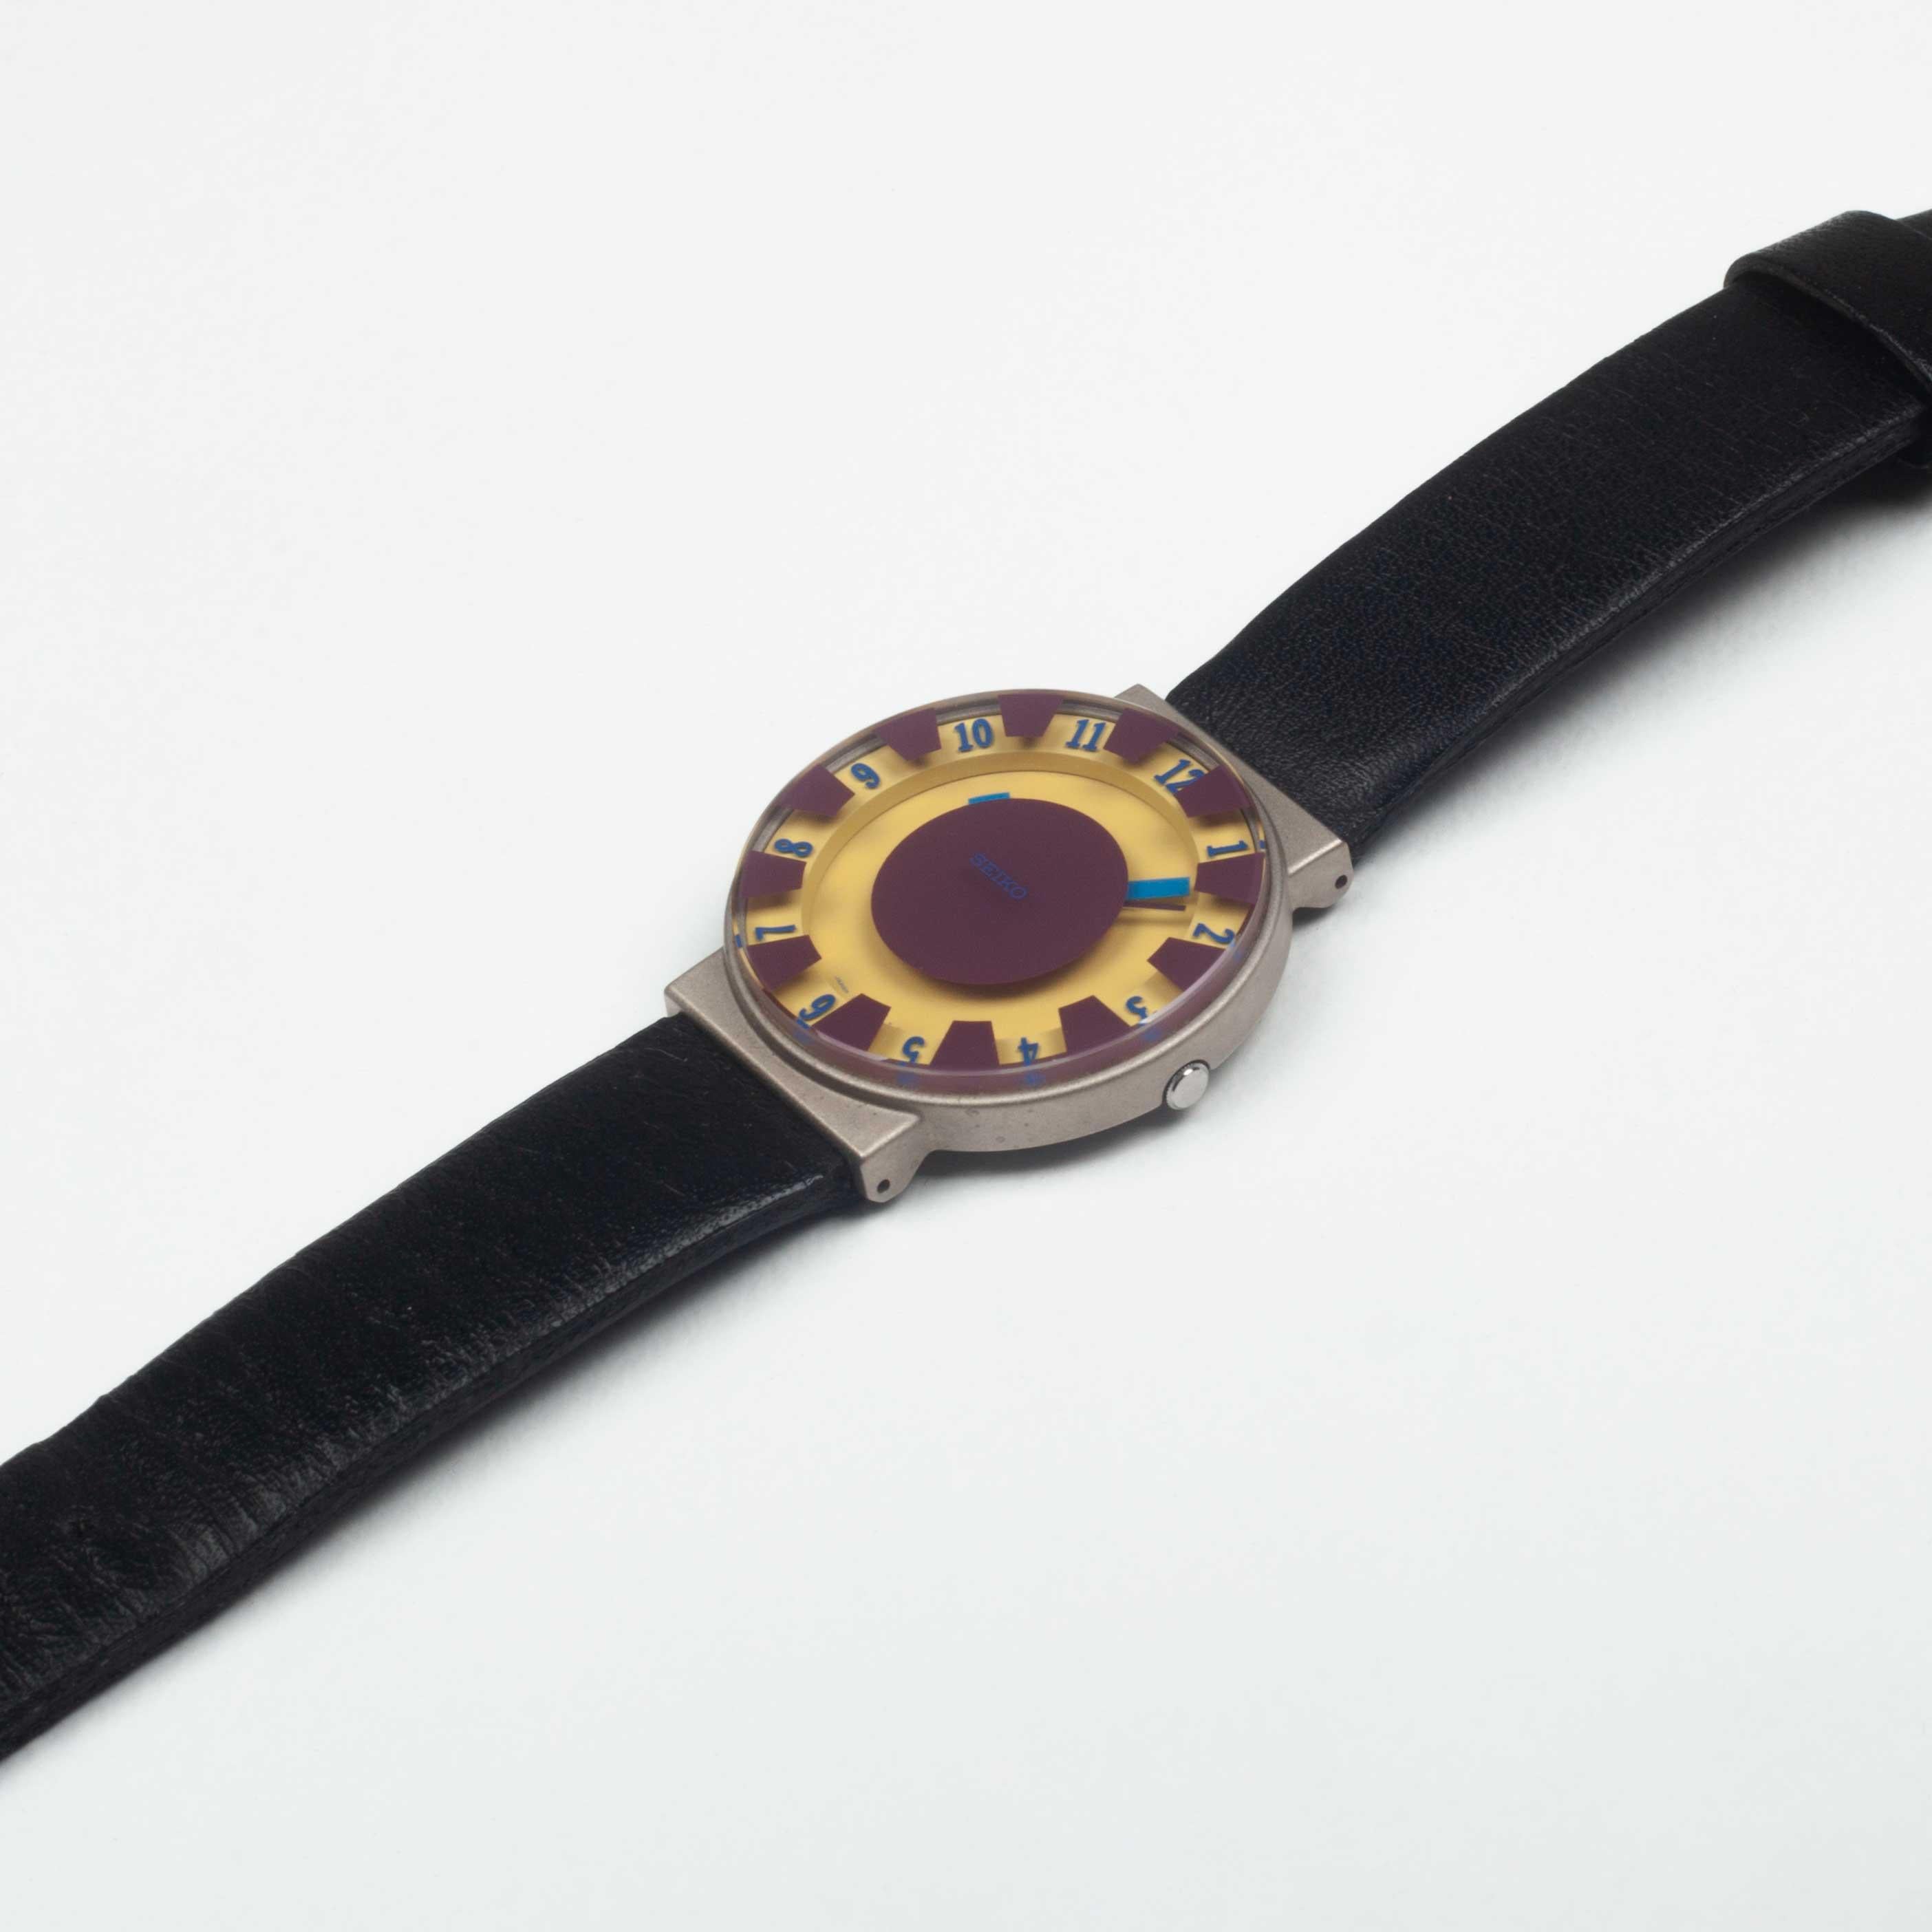 Japanese Ettore Sottsass Watch, Collection Sottsass for Seiko, Japan, 1993